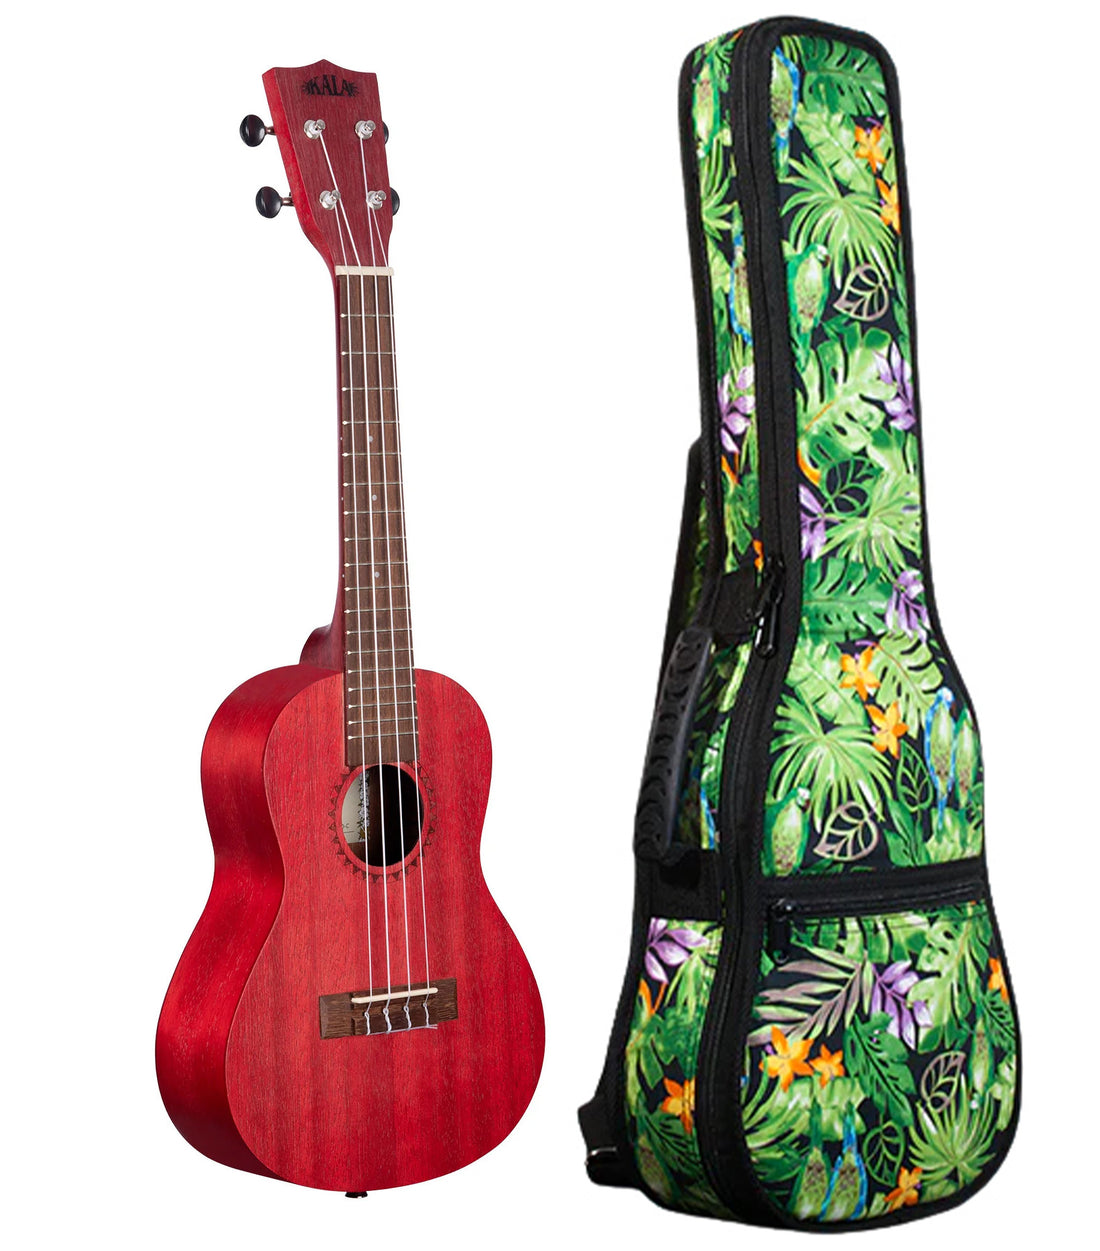 KA-MRT-RED-C Adobe Red Watercolor Meranti Concert Ukulele Includes Gigbag Floral Print, Padded with Backpack Straps